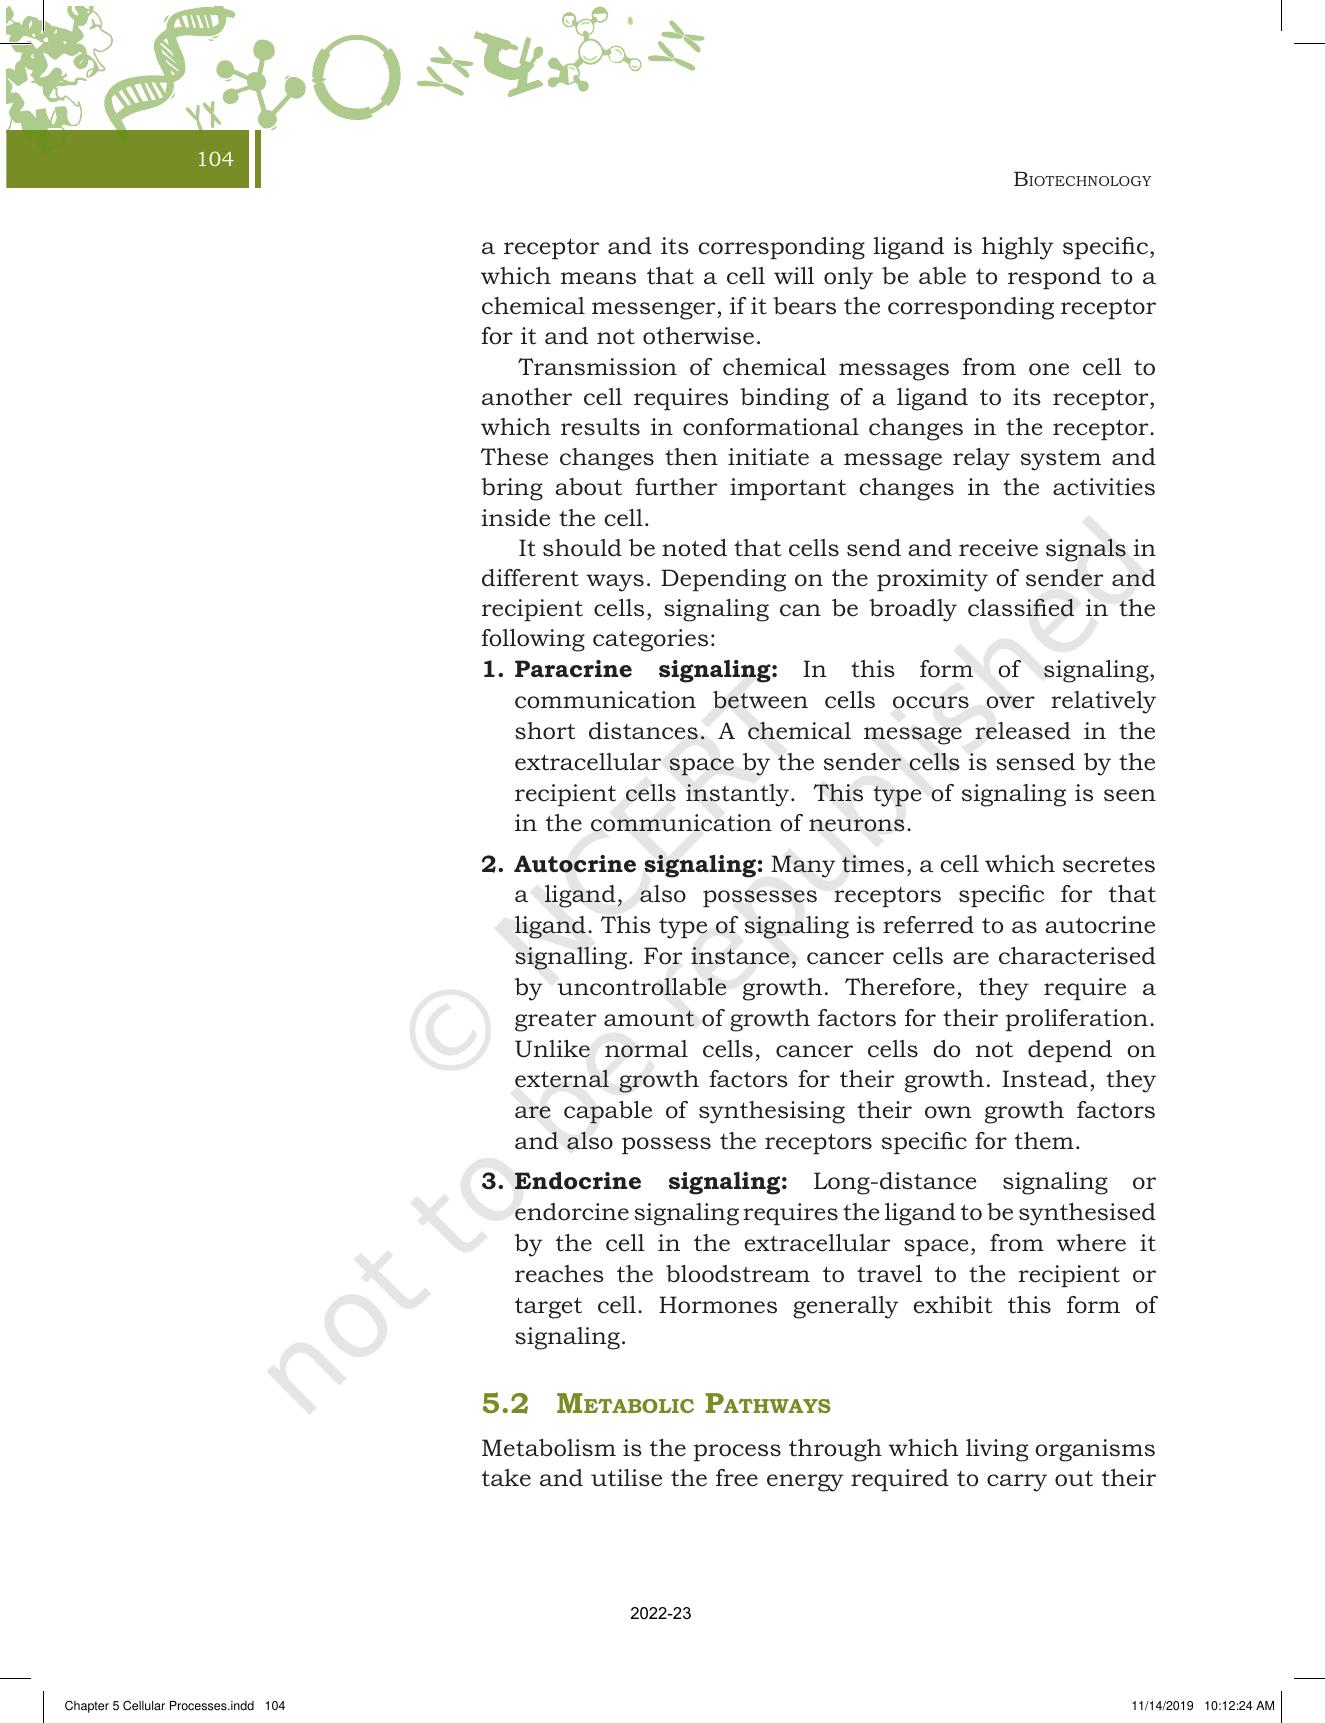 NCERT Book for Class 11 Biotechnology Chapter 5 Cellular Processes - Page 2